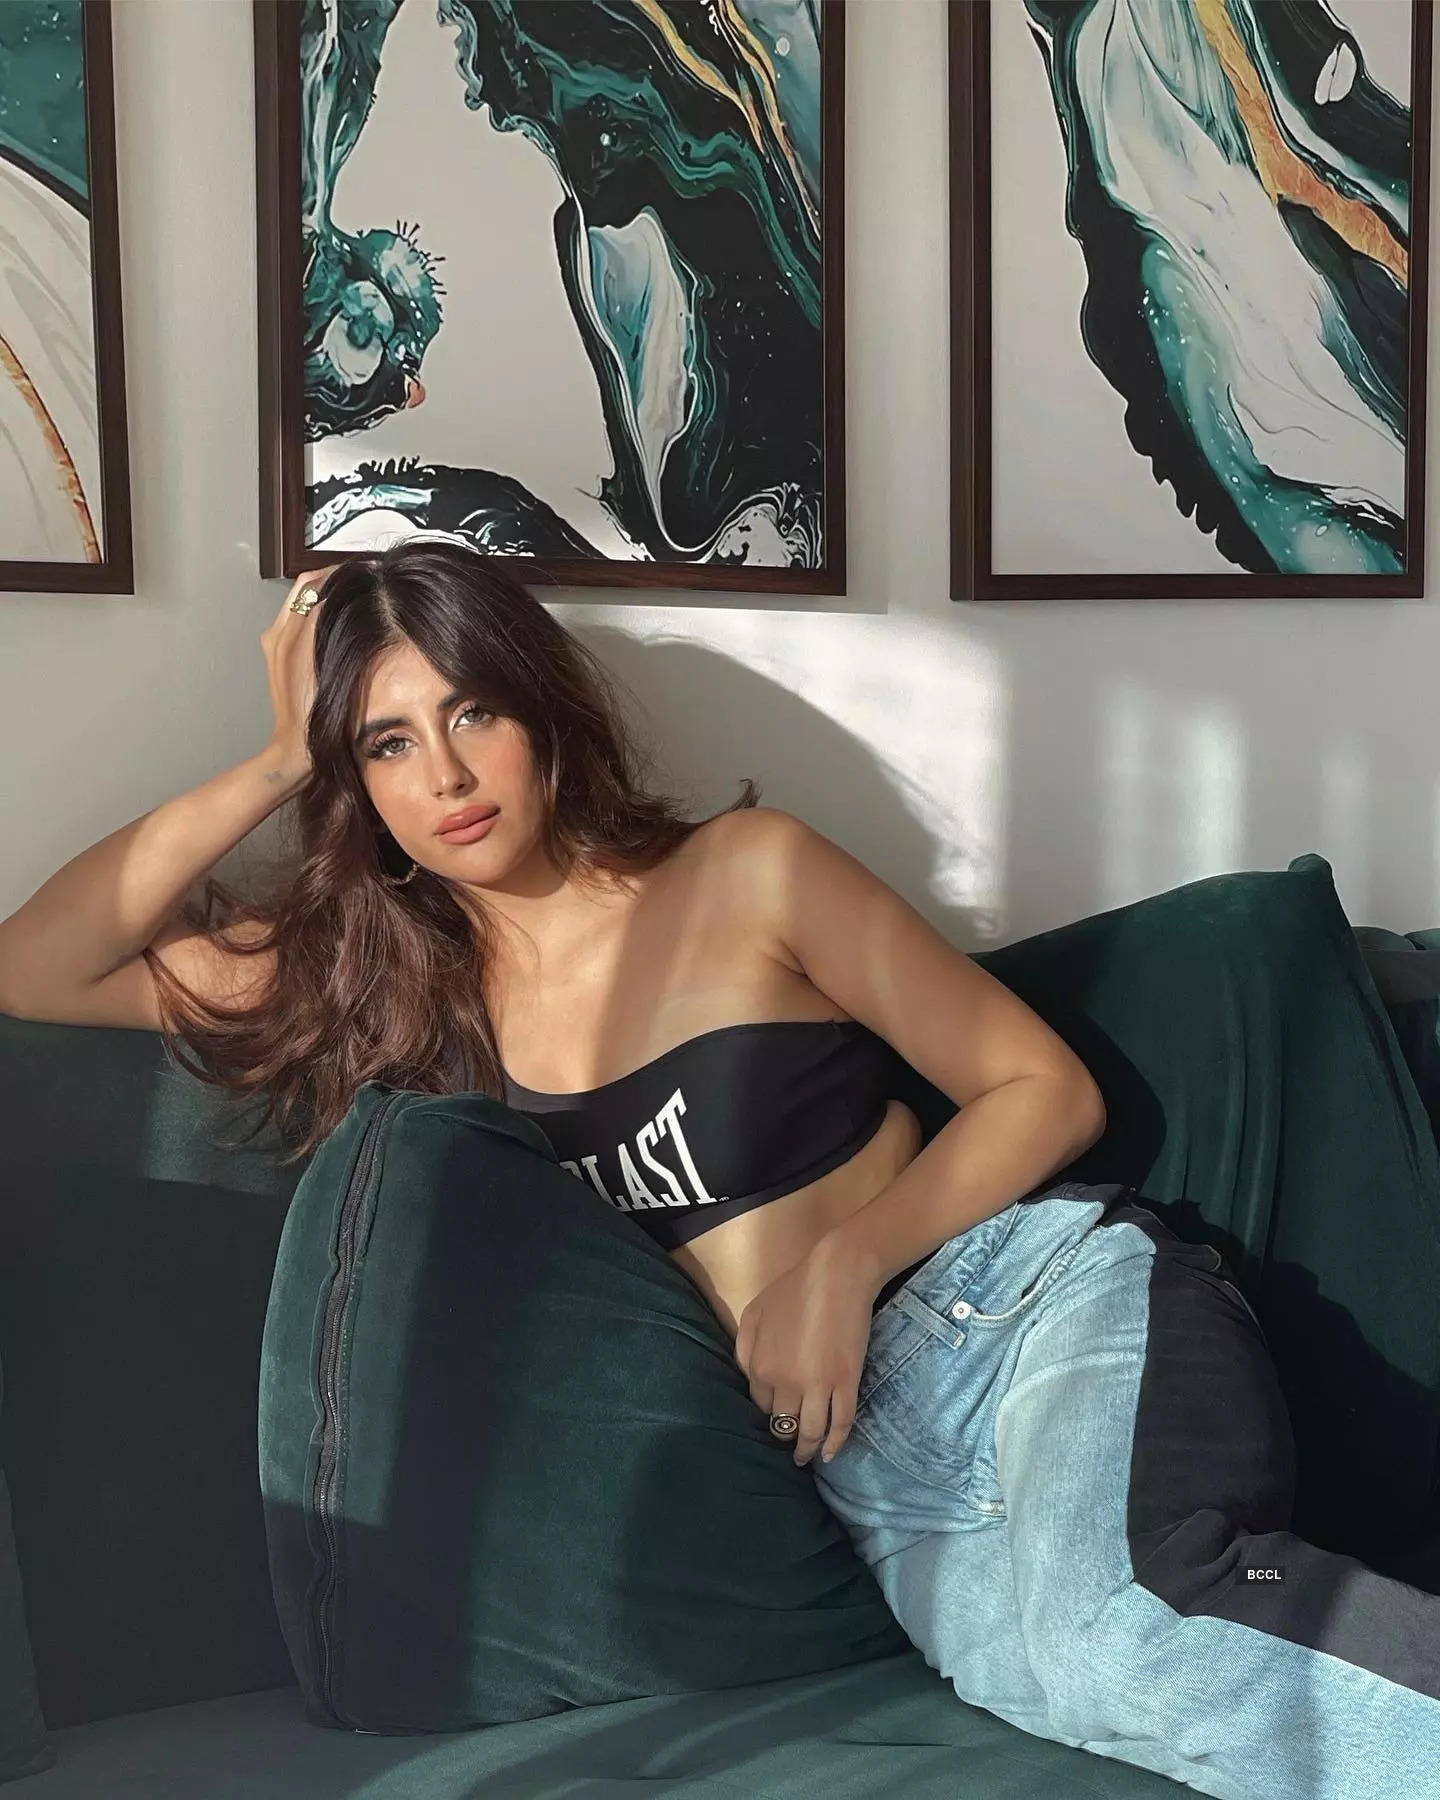 Meet fashionista Miesha Iyer, who is winning hearts with her alluring pictures